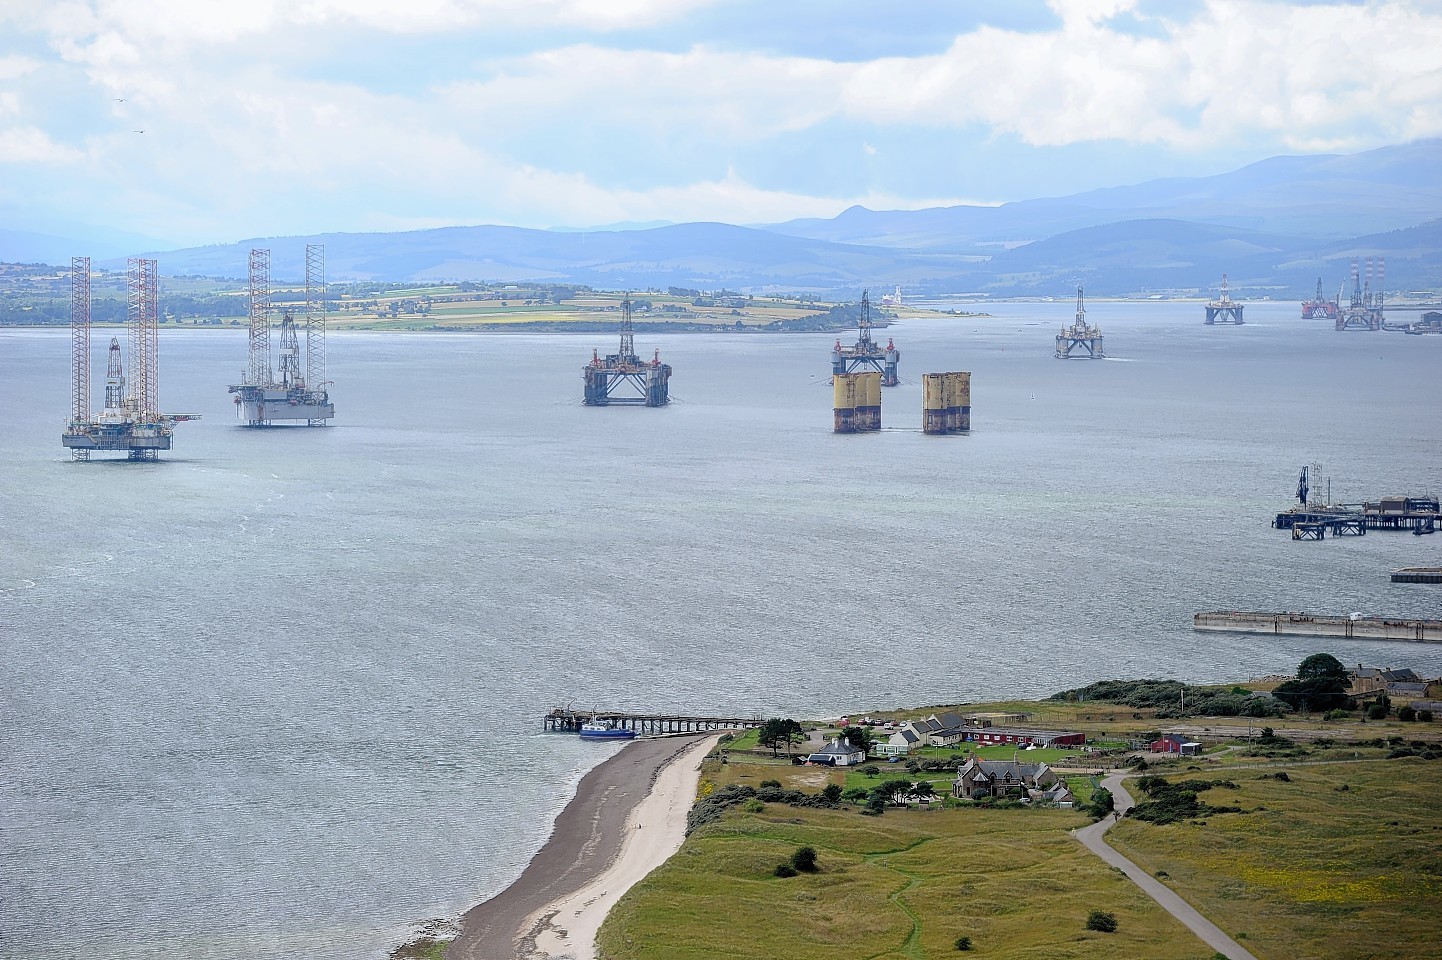 The Cromarty Firth